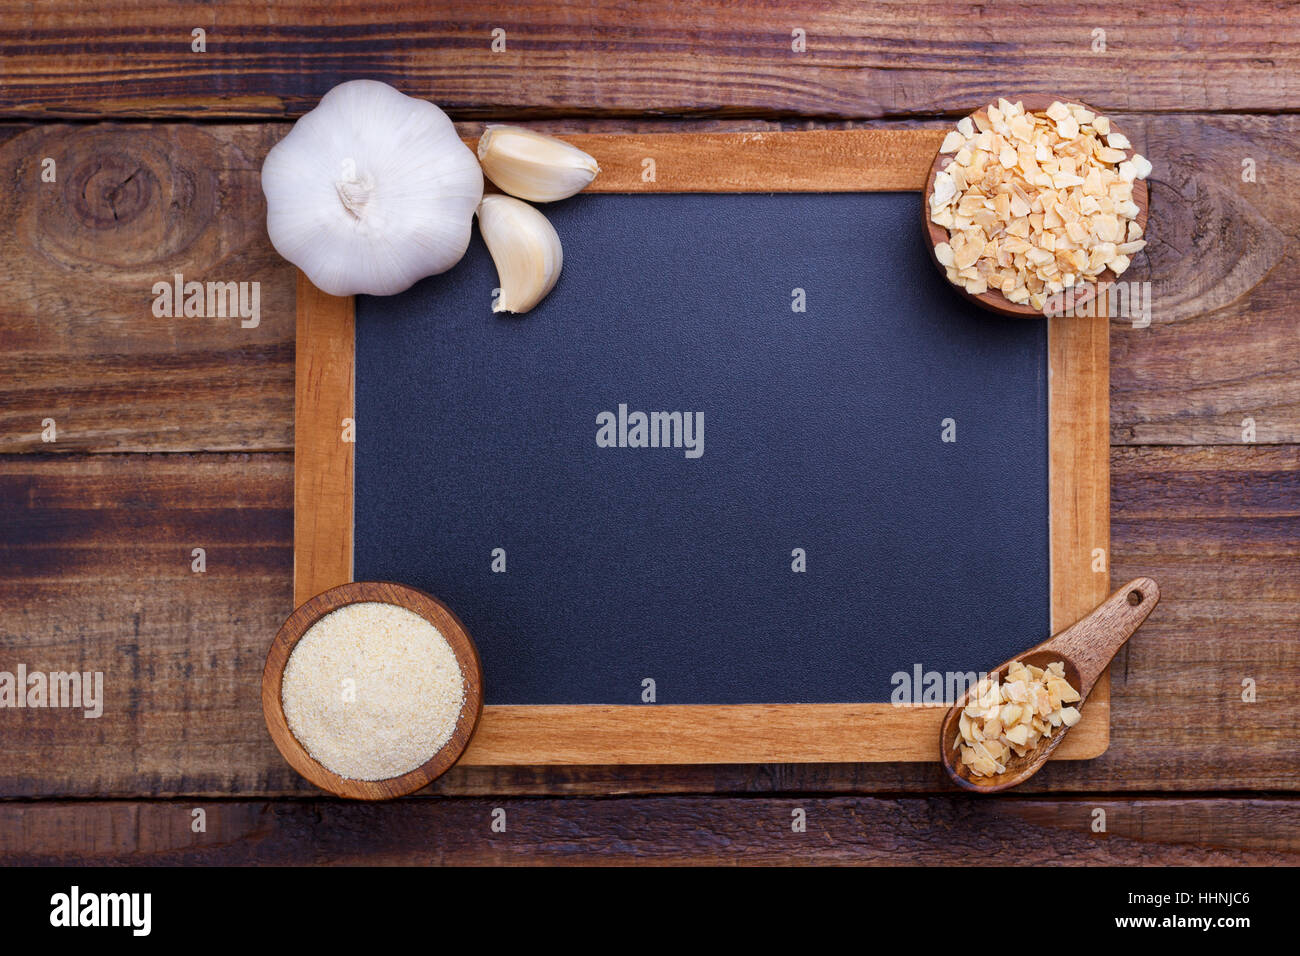 garlic cloves, bulb, flakes and powder on old wooden background with black board for text Stock Photo